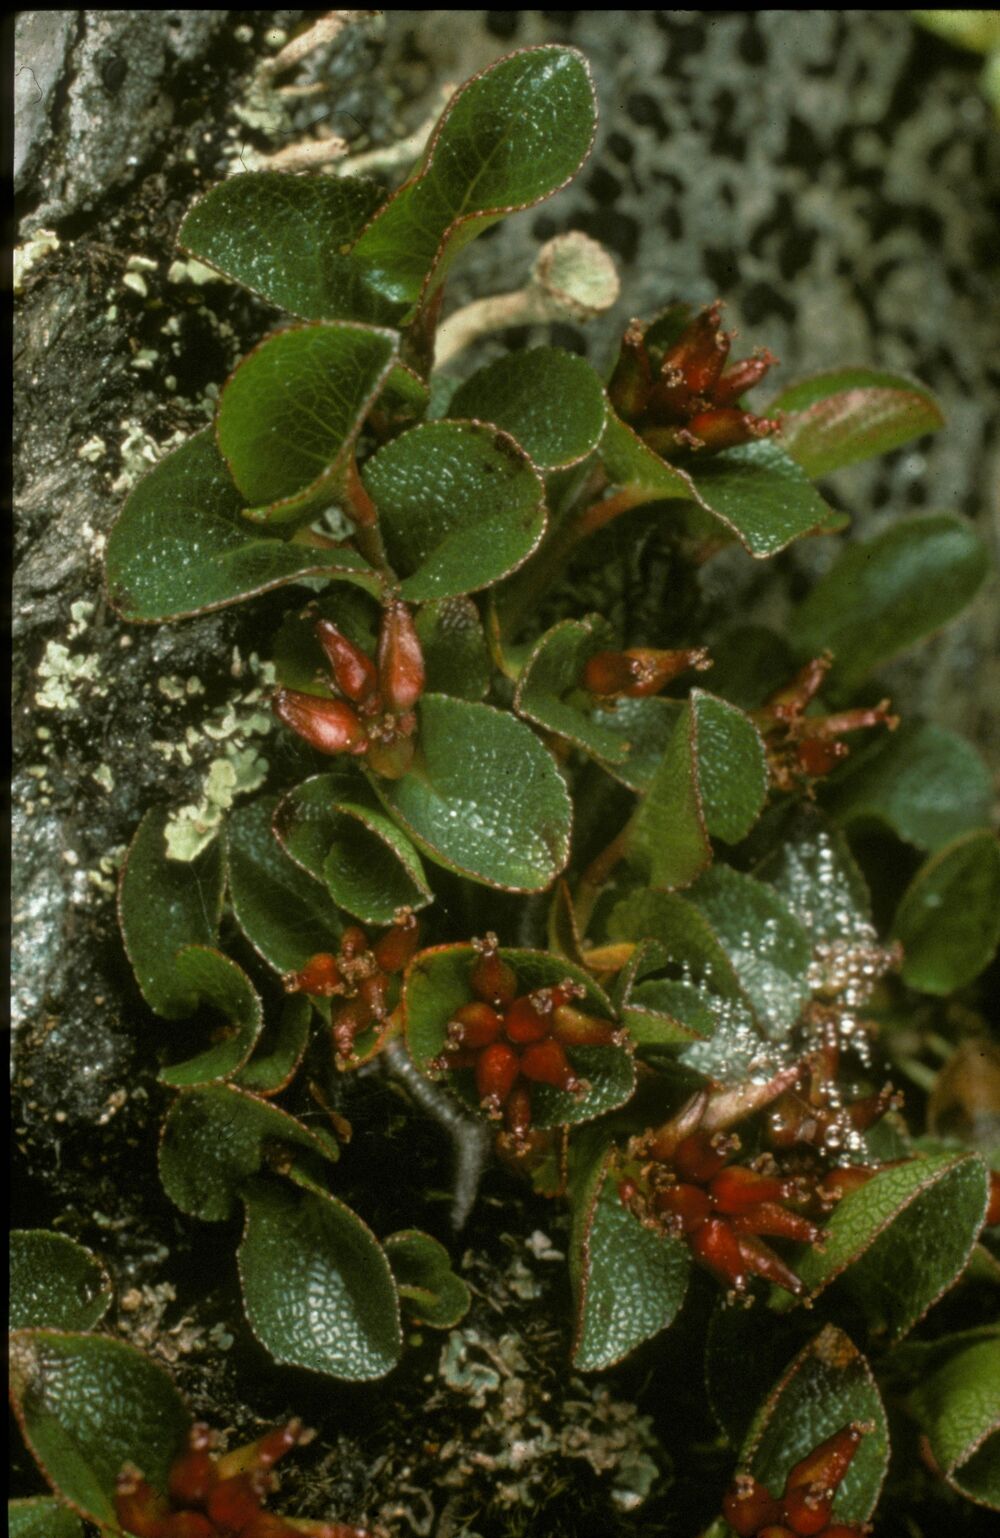 A close-up of a small alpine plant with oval green leaves.